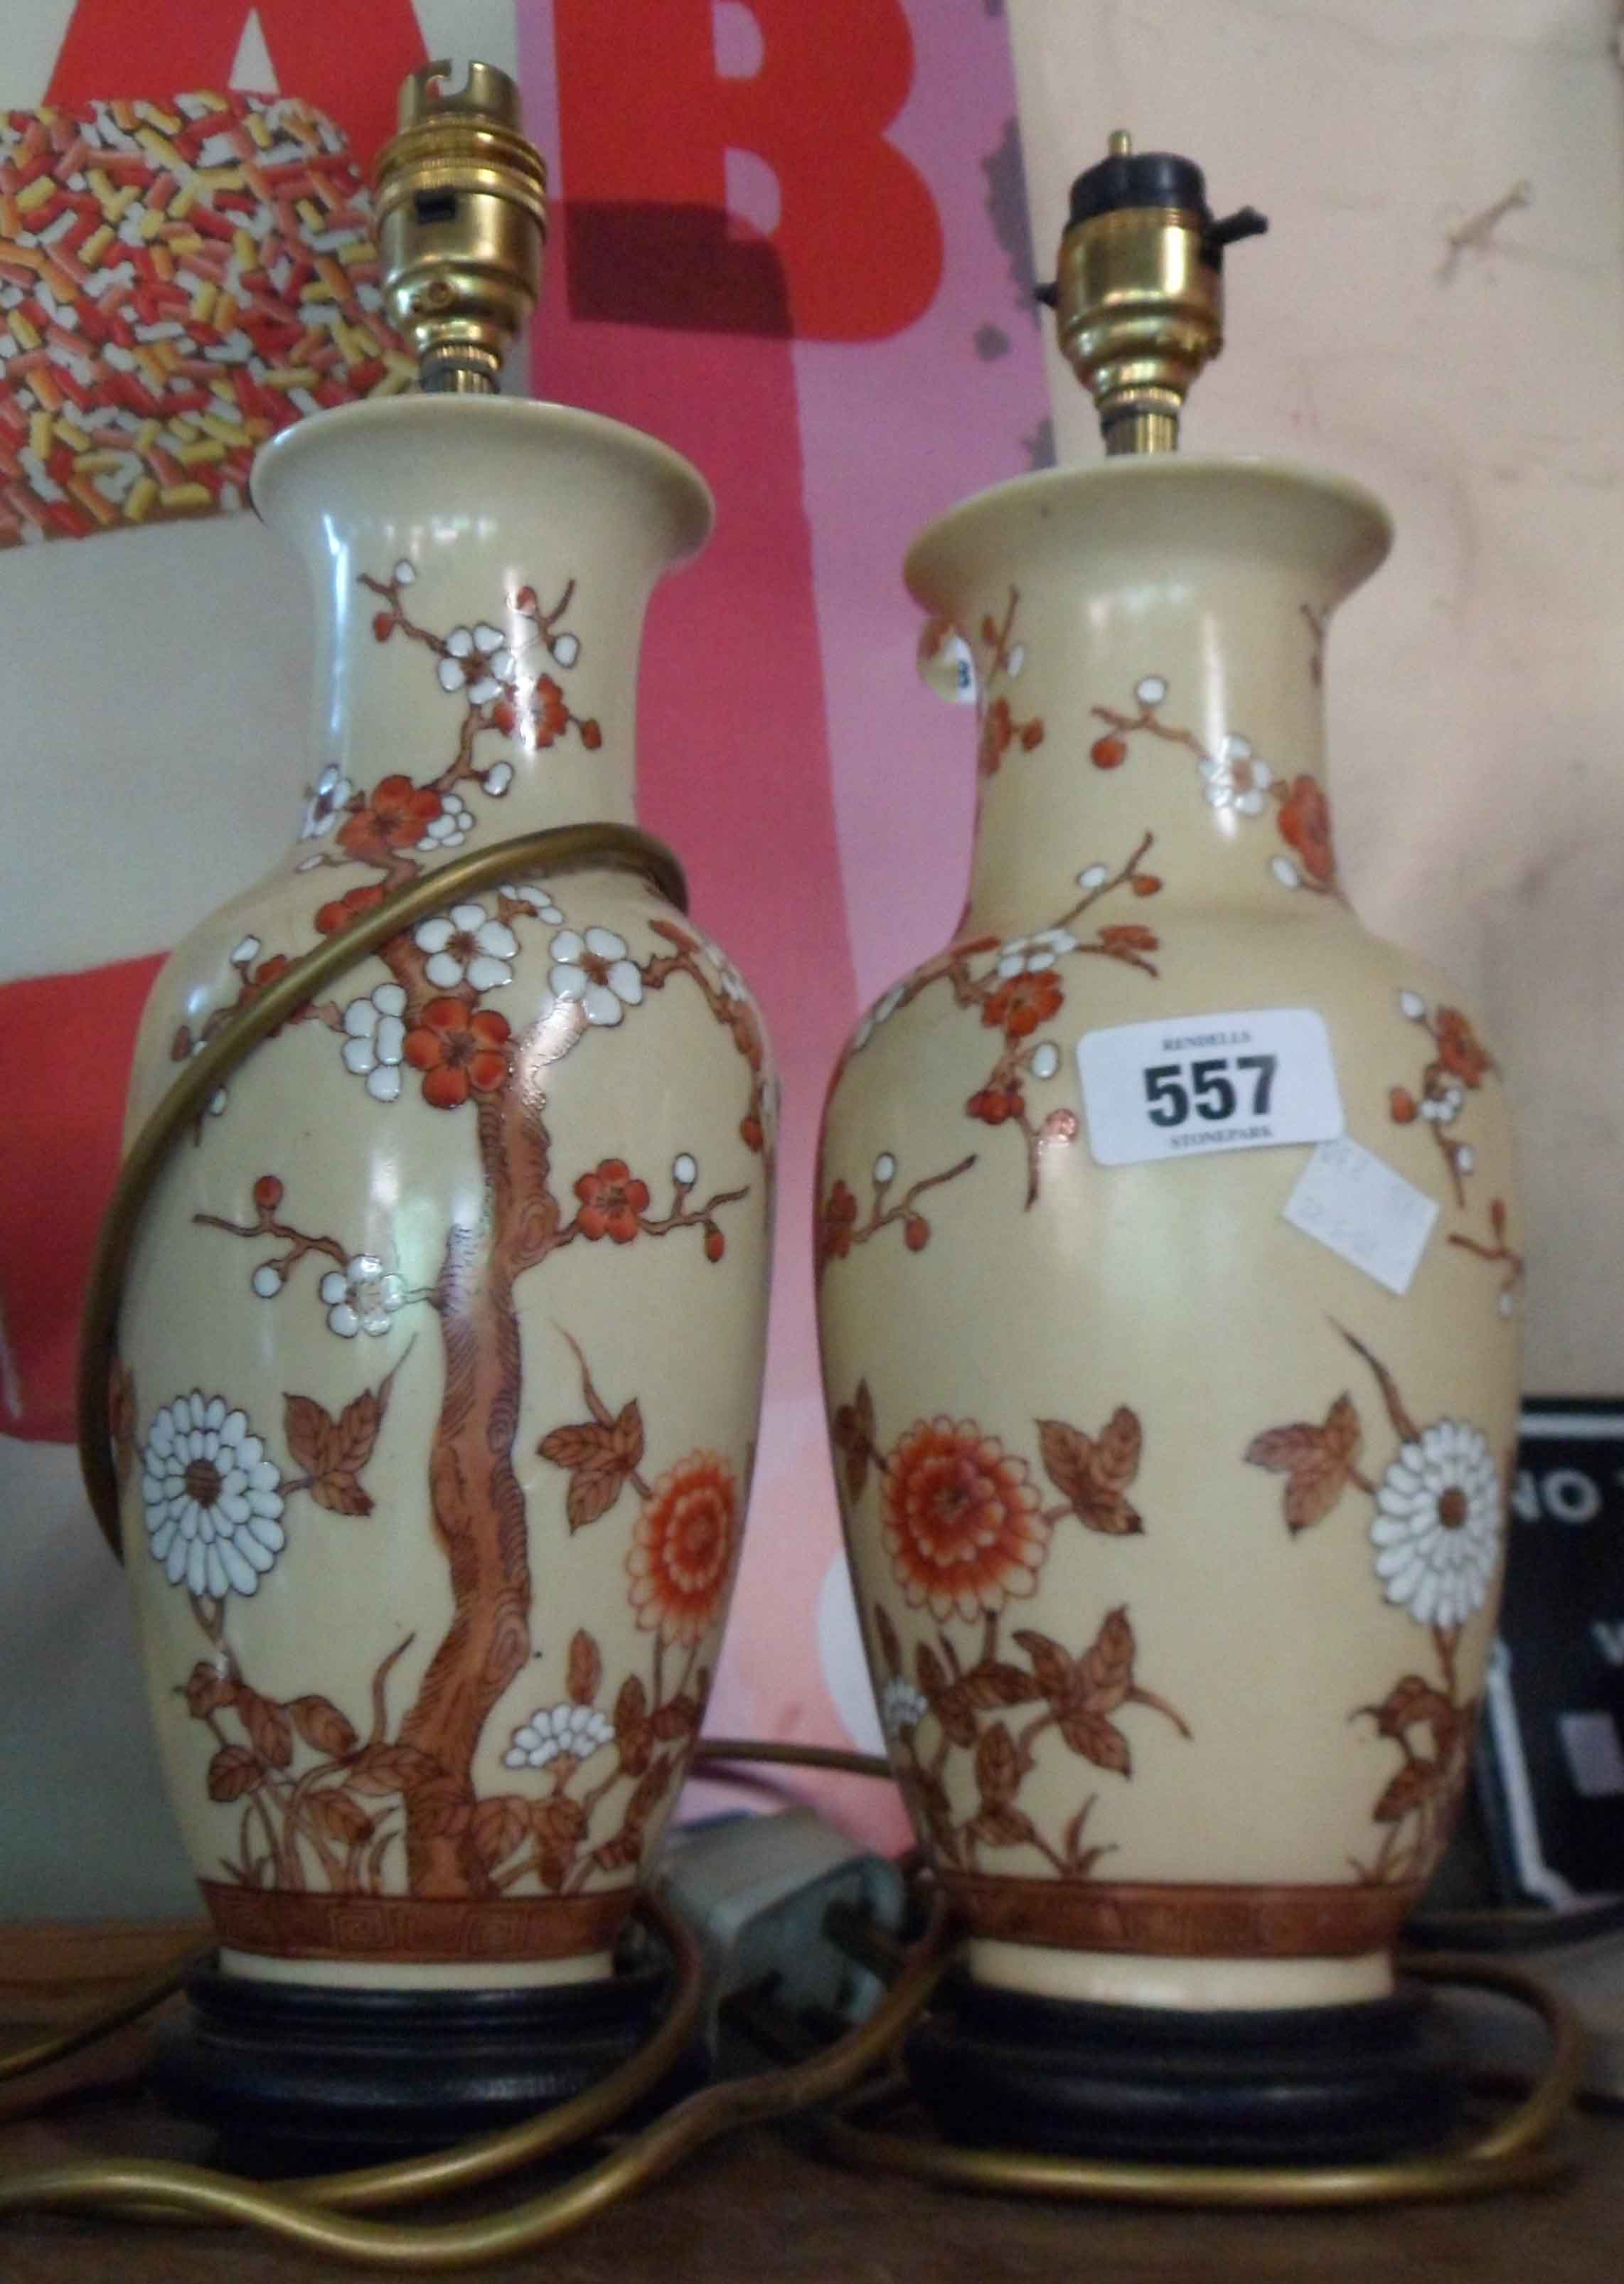 Two ceramic table lamps of vase form decorated with prunus blossom design